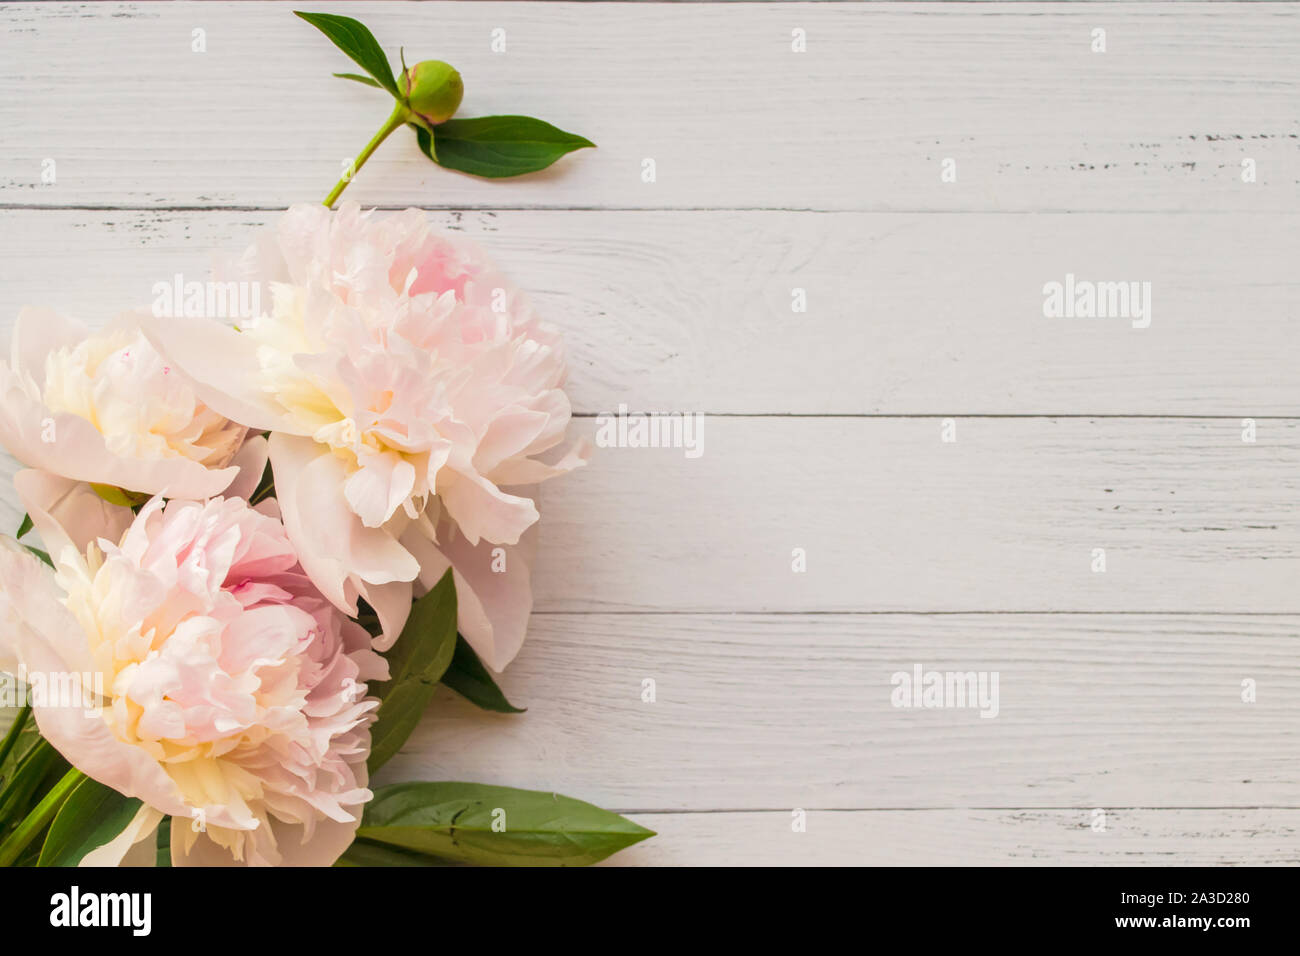 Romantic bouquet of peonies on light wooden background with copyspace Stock Photo